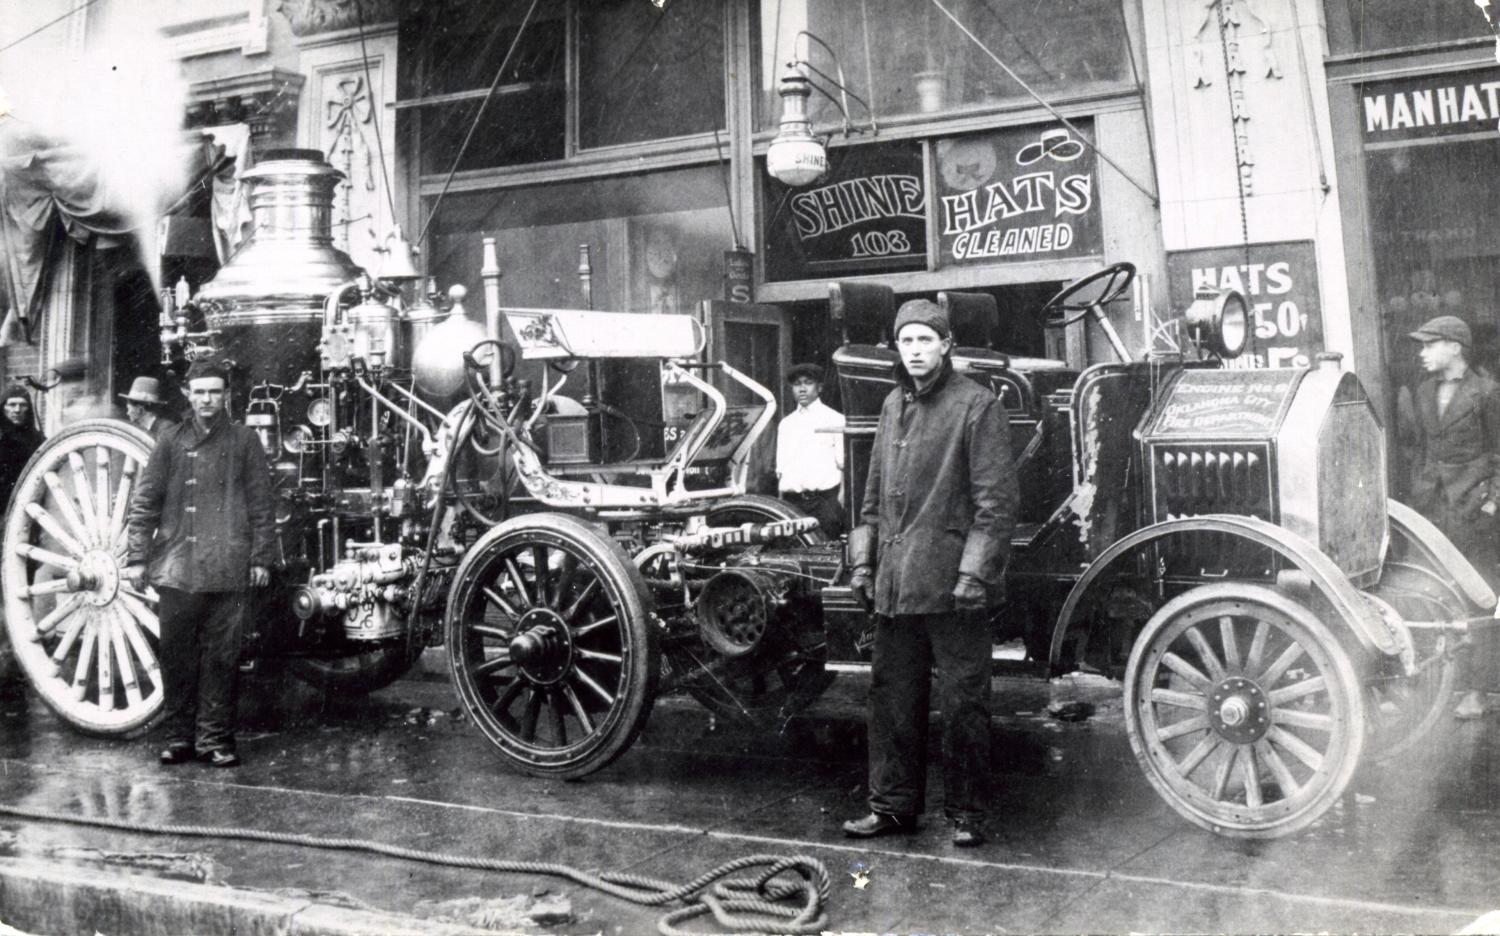 Two men stand in front of an elaborate fire engine with shops and passersby visible in the background.